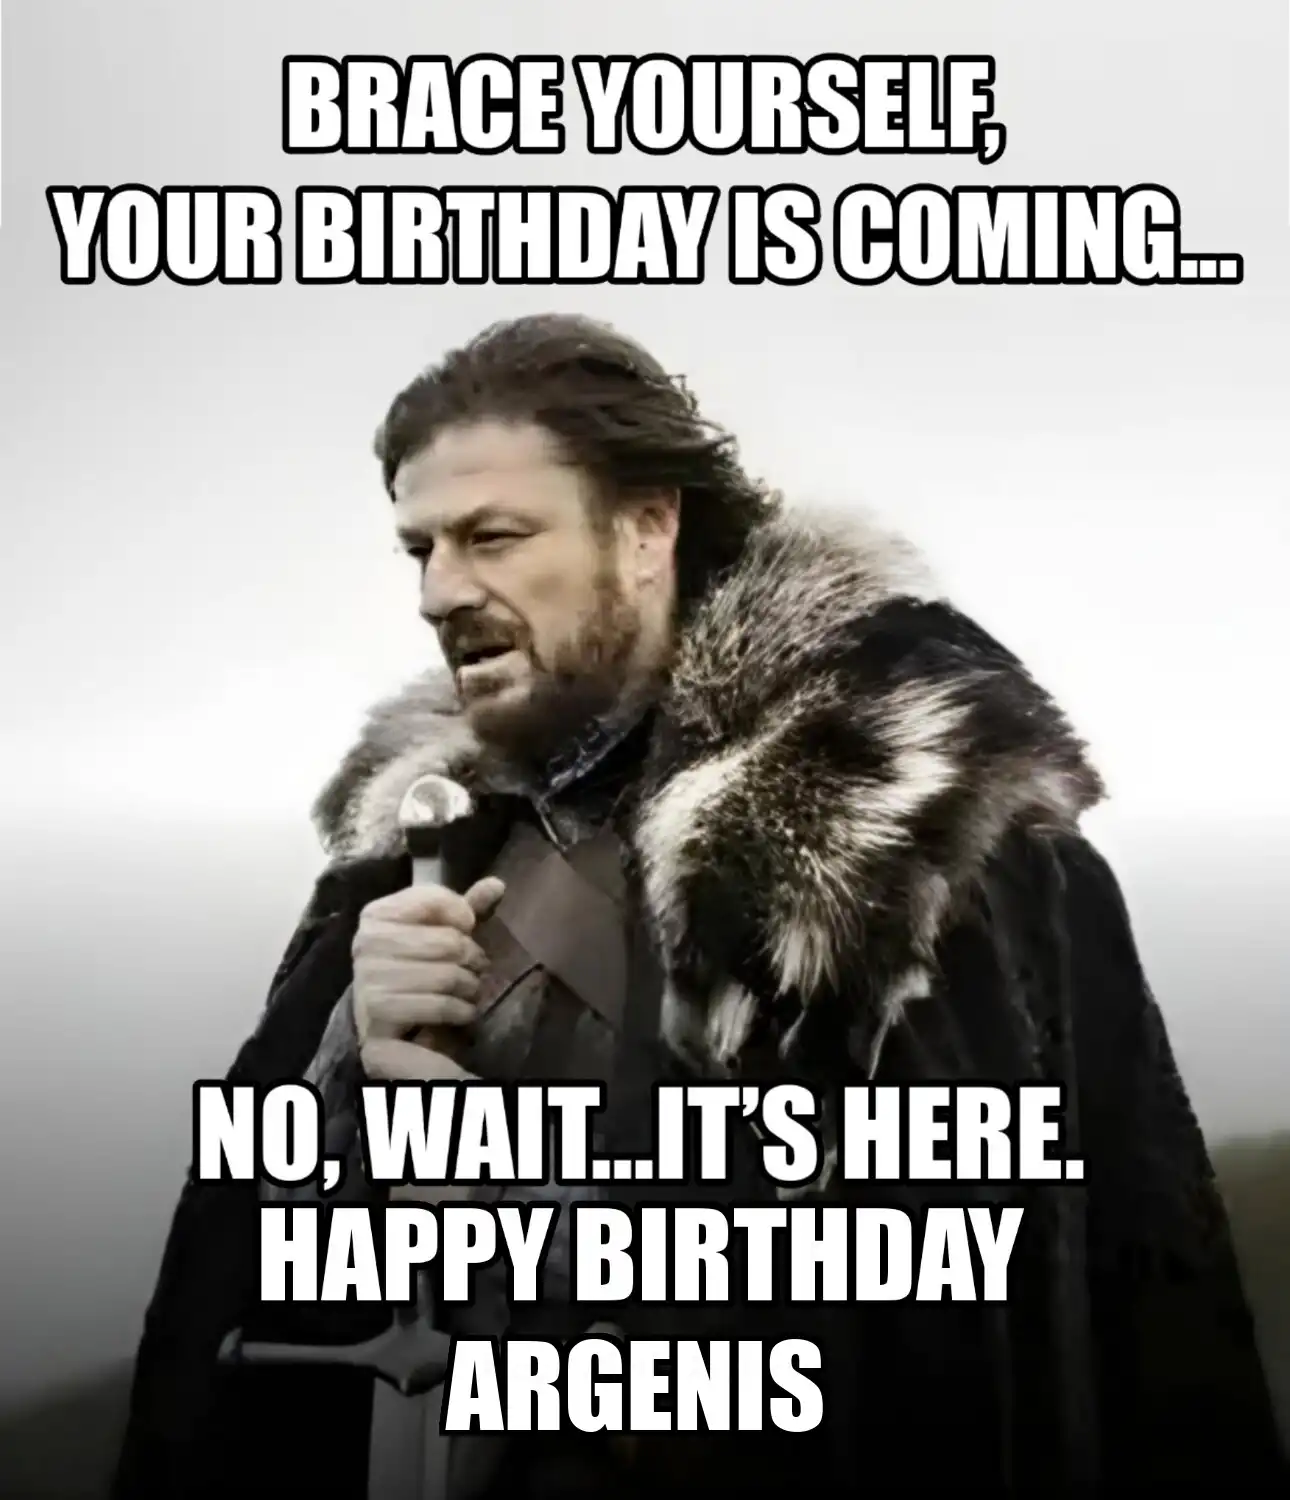 Happy Birthday Argenis Brace Yourself Your Birthday Is Coming Meme